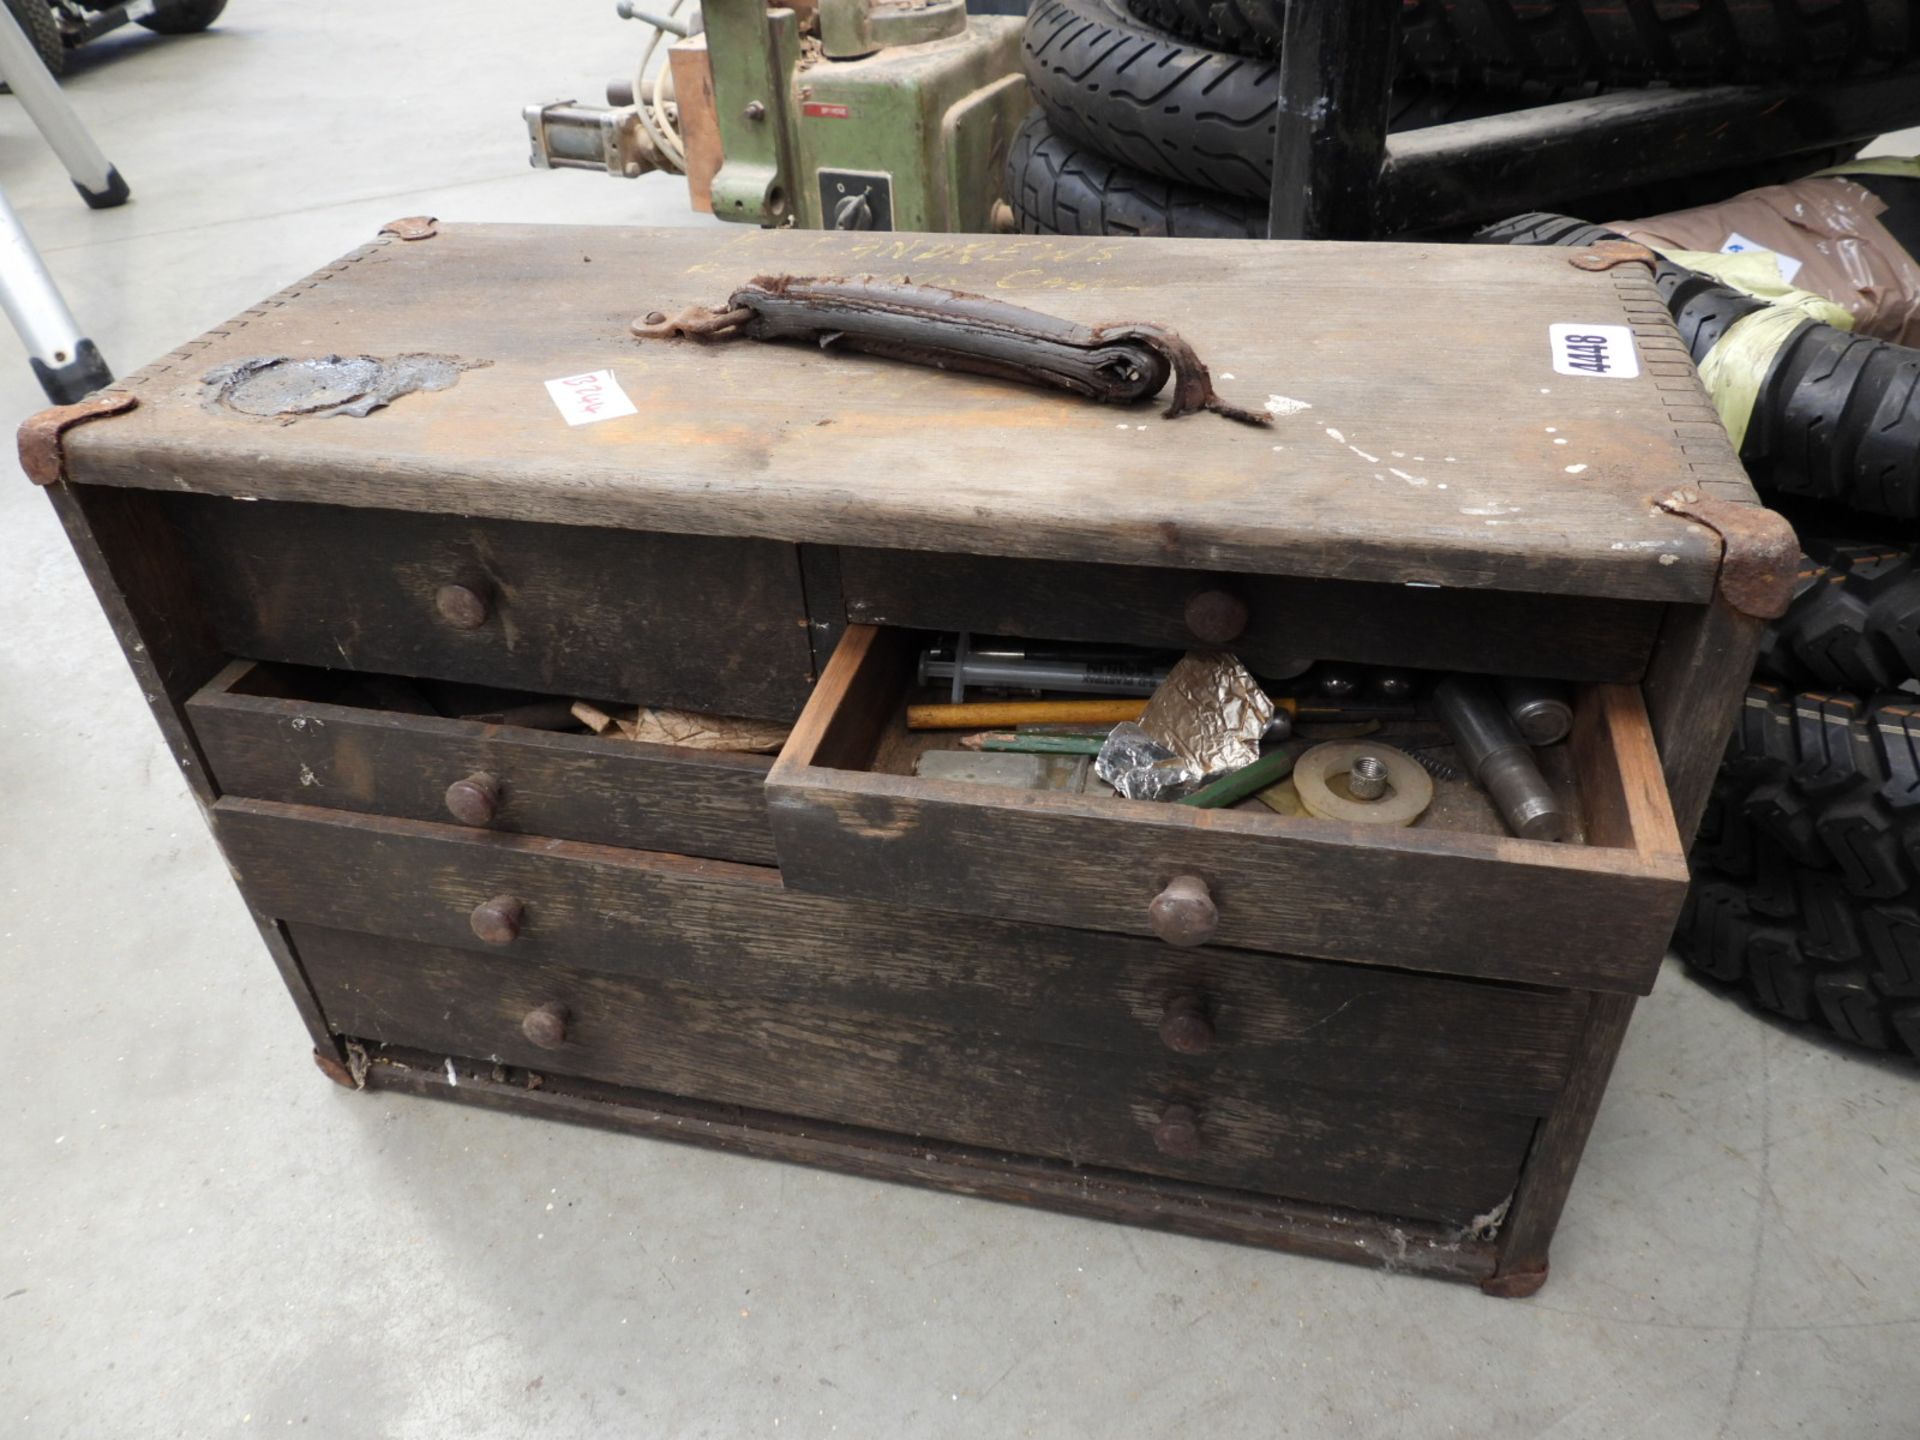 Vintage tool box, containing small tools